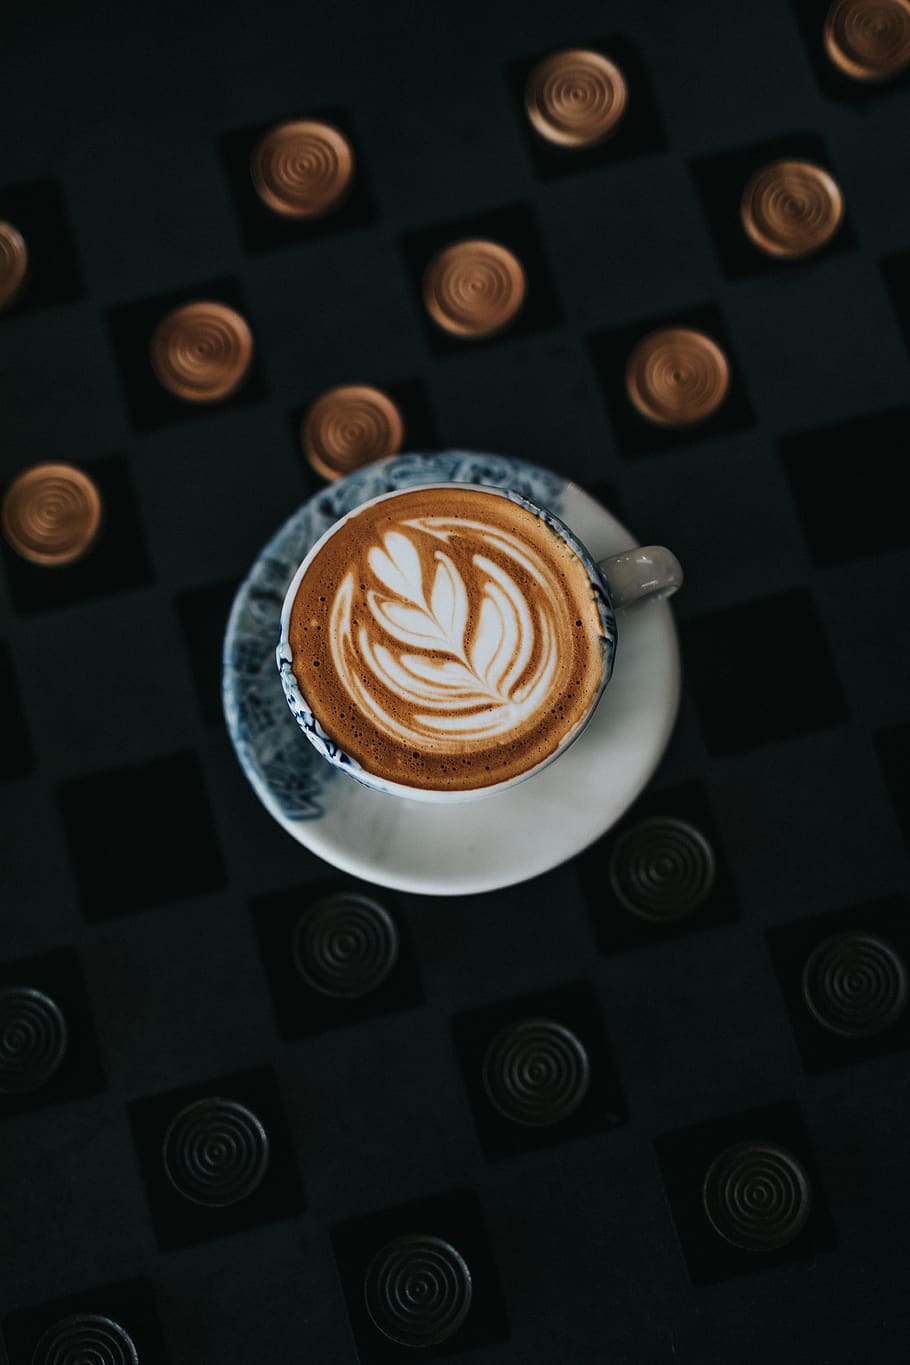 https://c0.wallpaperflare.com/preview/865/933/118/coffee-fiend-coffee-addict-coffee-guy-coffee-lover.jpg